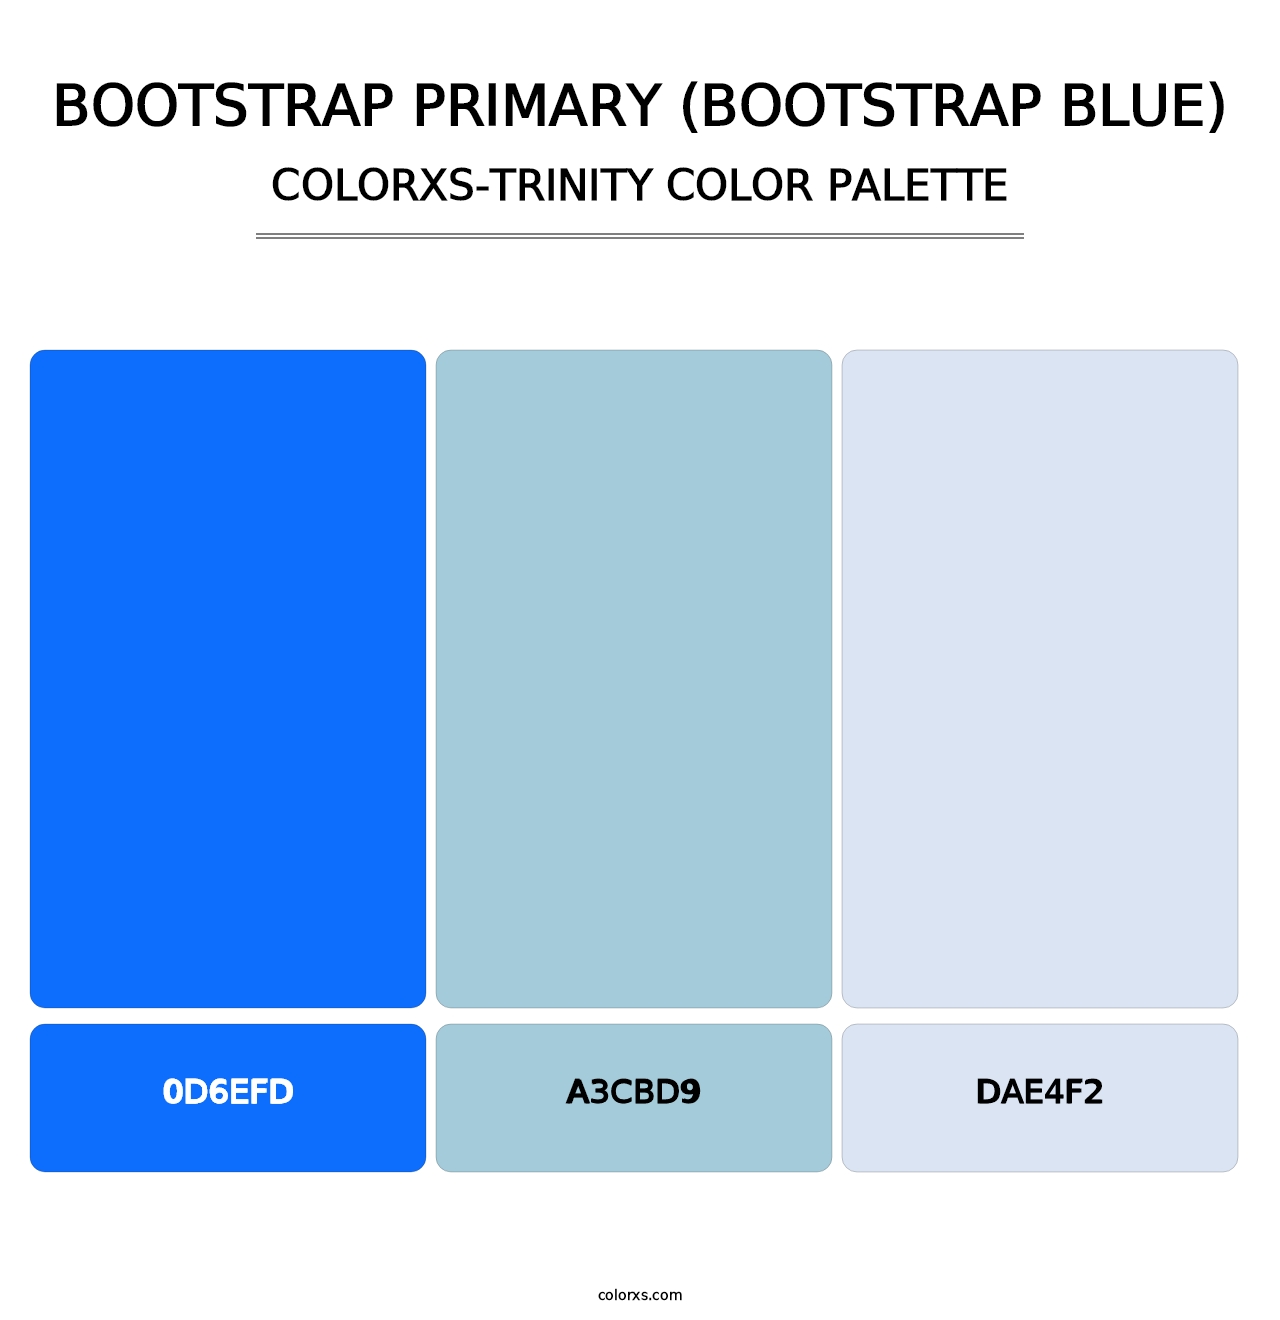 Bootstrap Primary (Bootstrap Blue) - Colorxs Trinity Palette